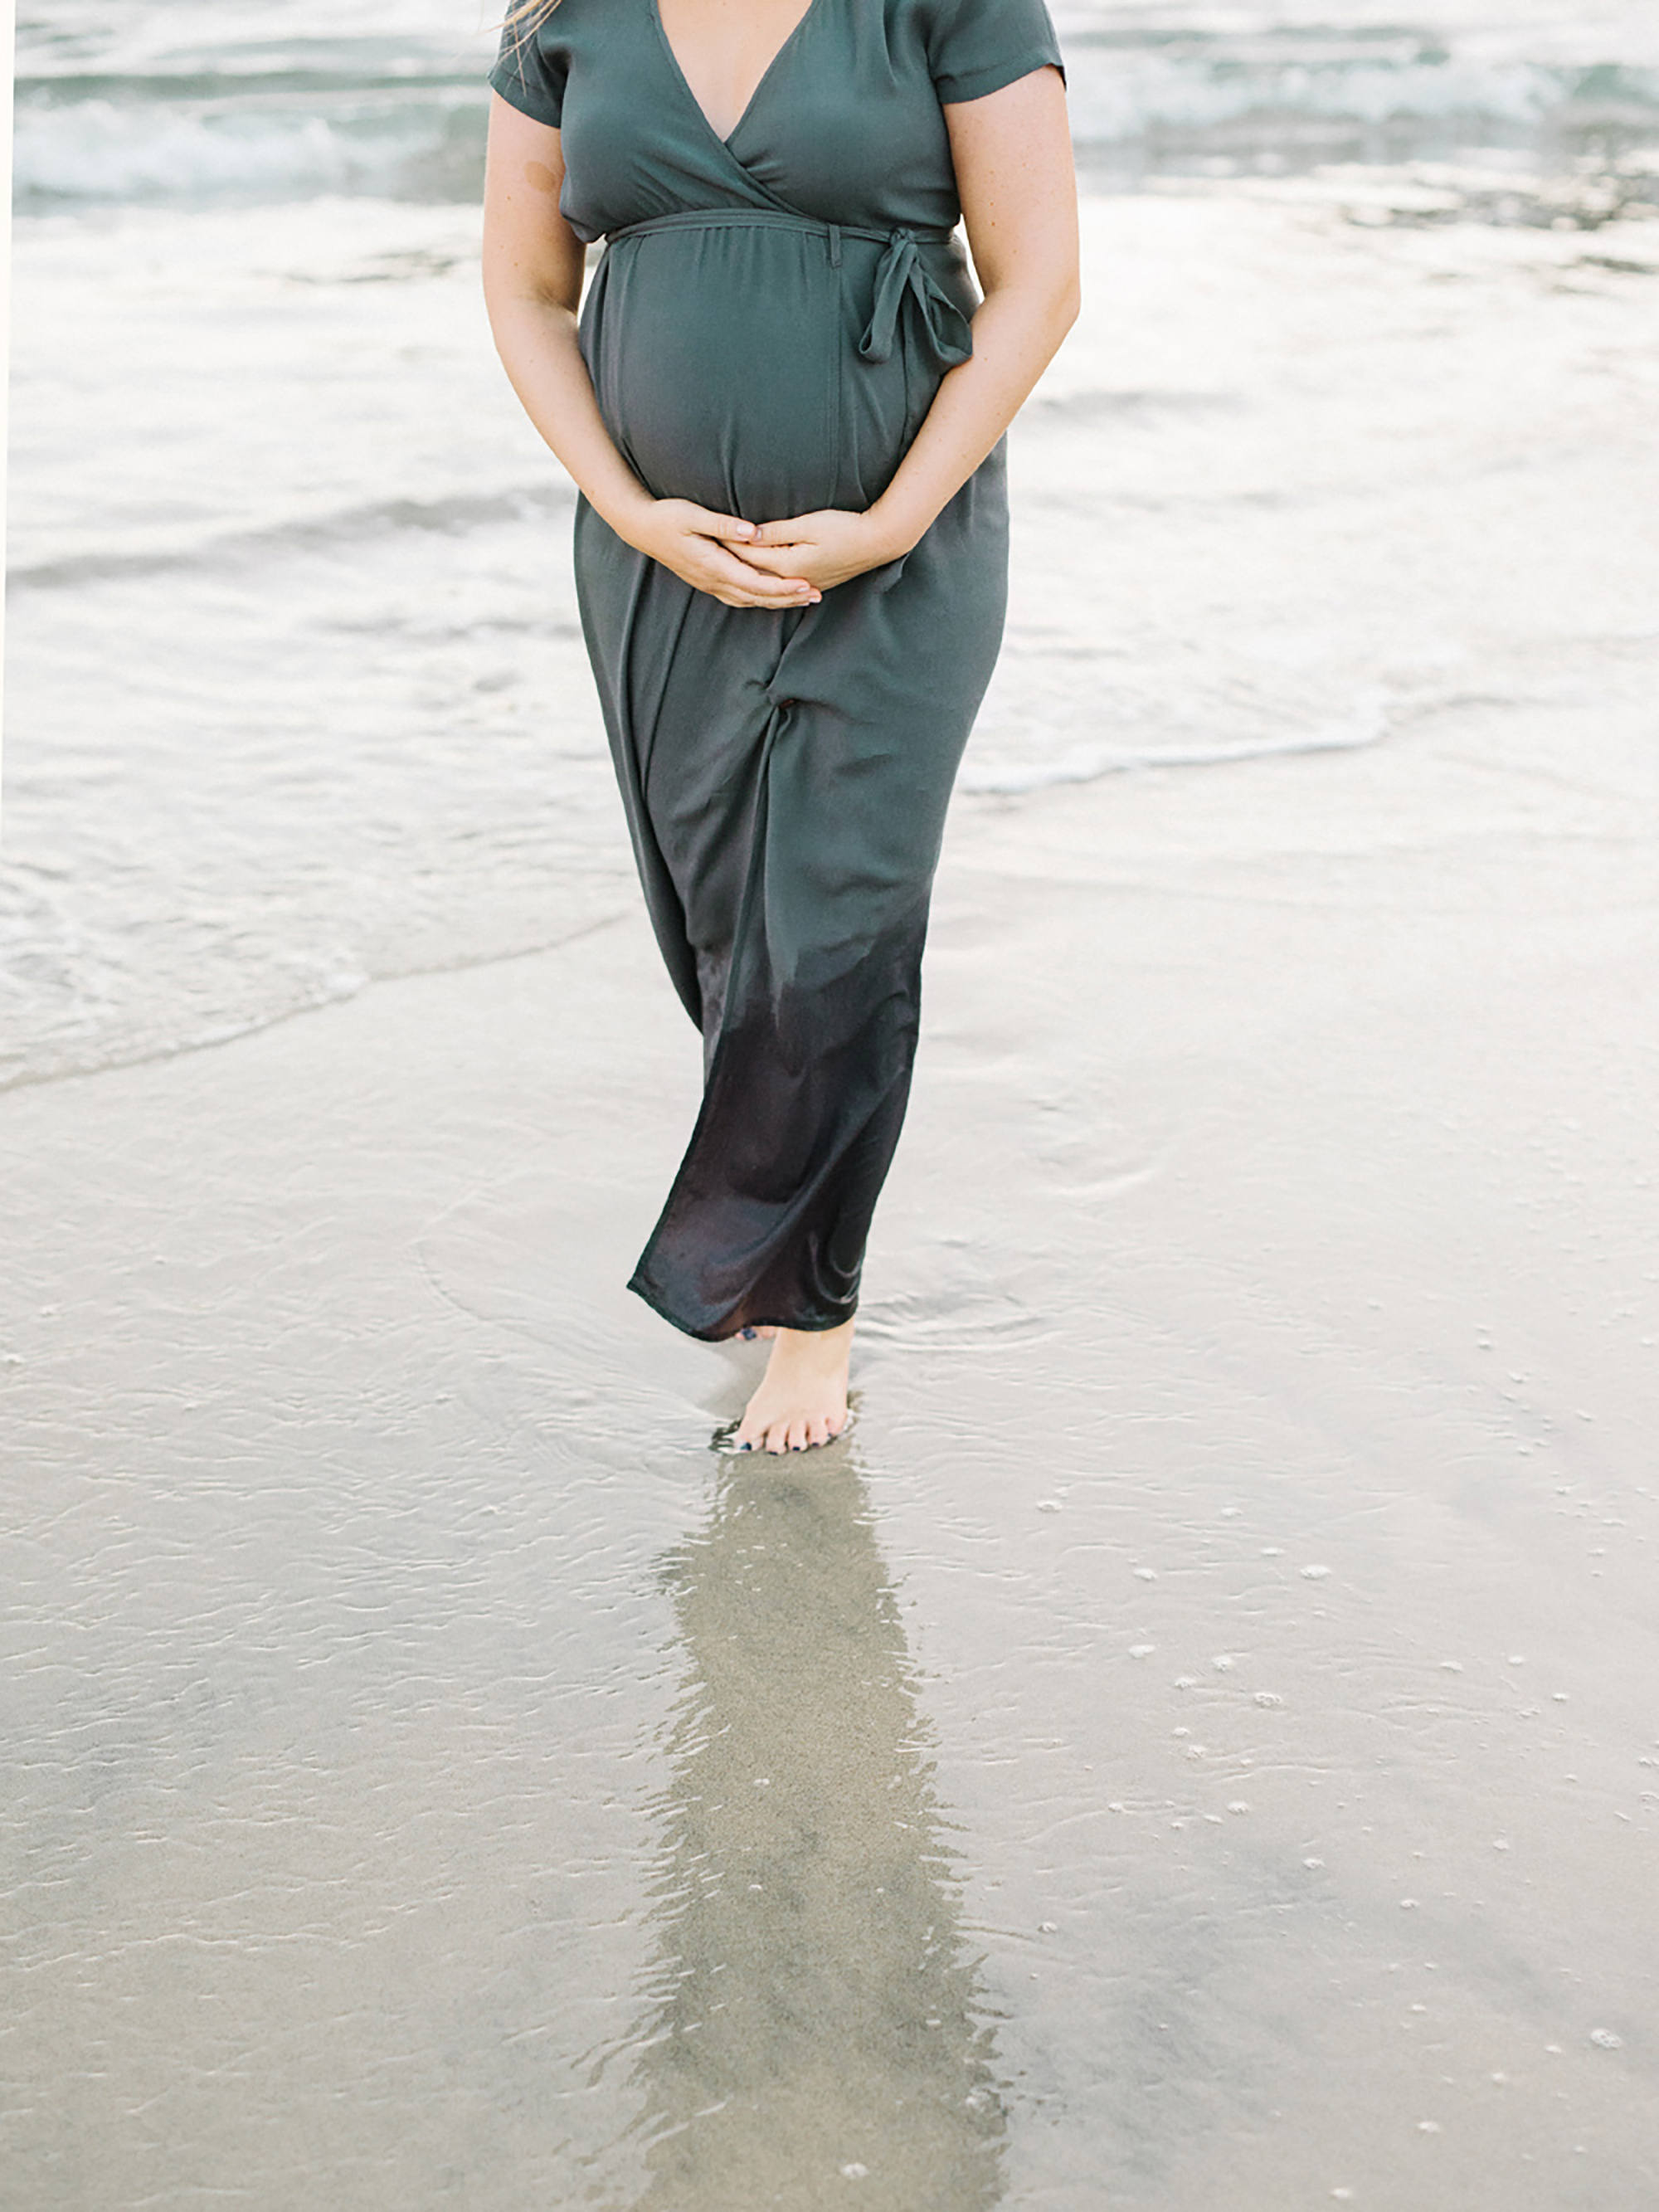 maternity_sessions_on_film_14